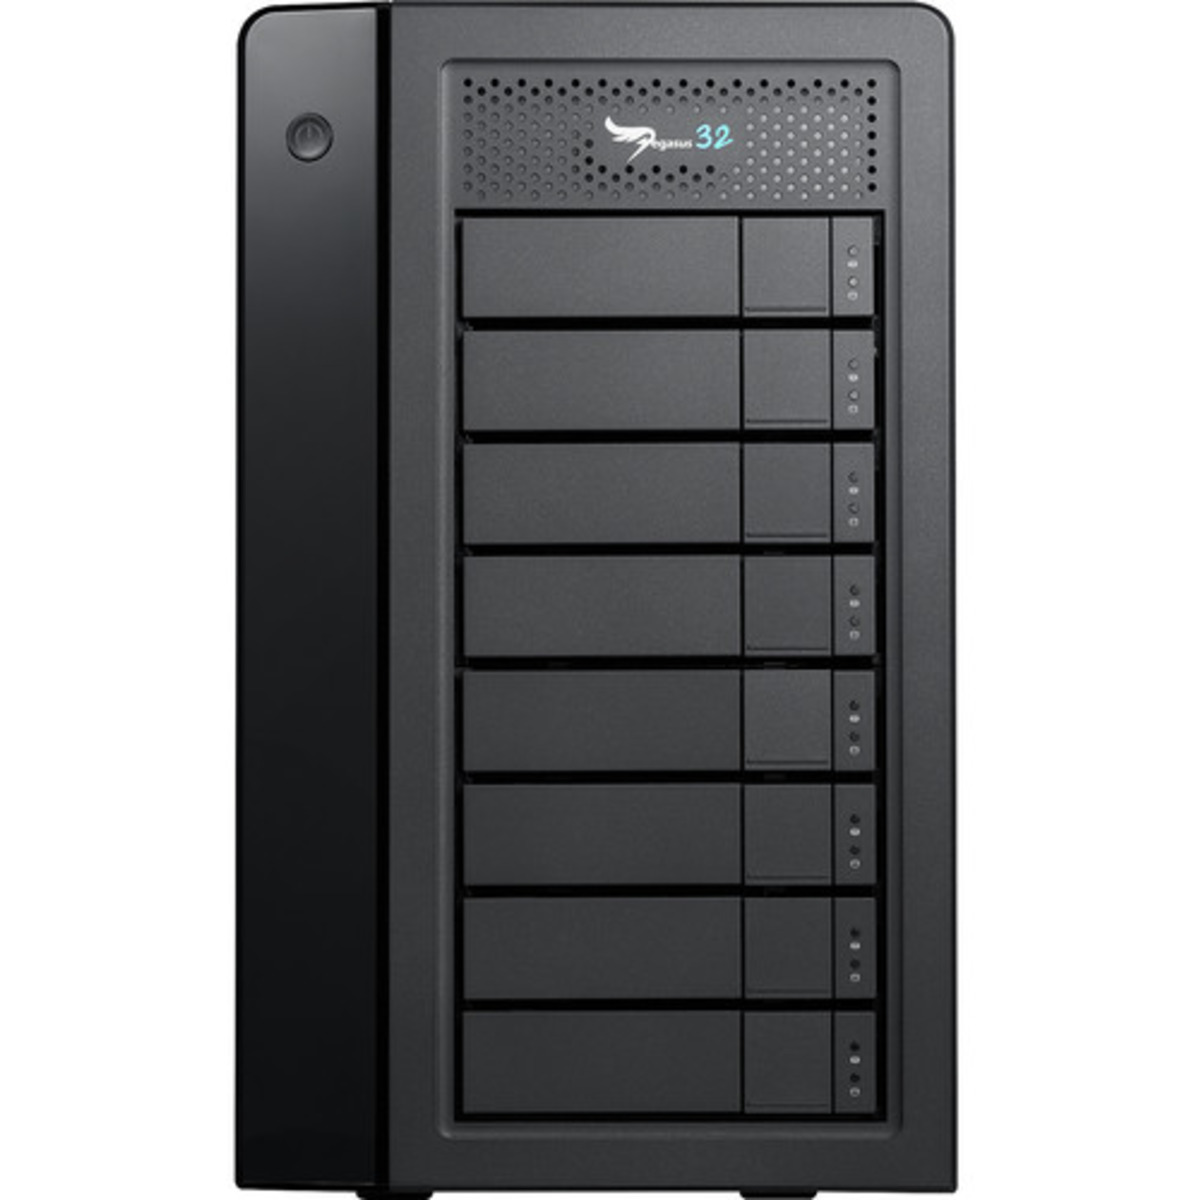 Promise Technology Pegasus32 R8 Thunderbolt 3 120tb 8-Bay Desktop Multimedia / Power User / Business DAS - Direct Attached Storage Device 5x24tb Western Digital Red Pro WD240KFGX 3.5 7200rpm SATA 6Gb/s HDD NAS Class Drives Installed - Burn-In Tested - ON SALE Pegasus32 R8 Thunderbolt 3